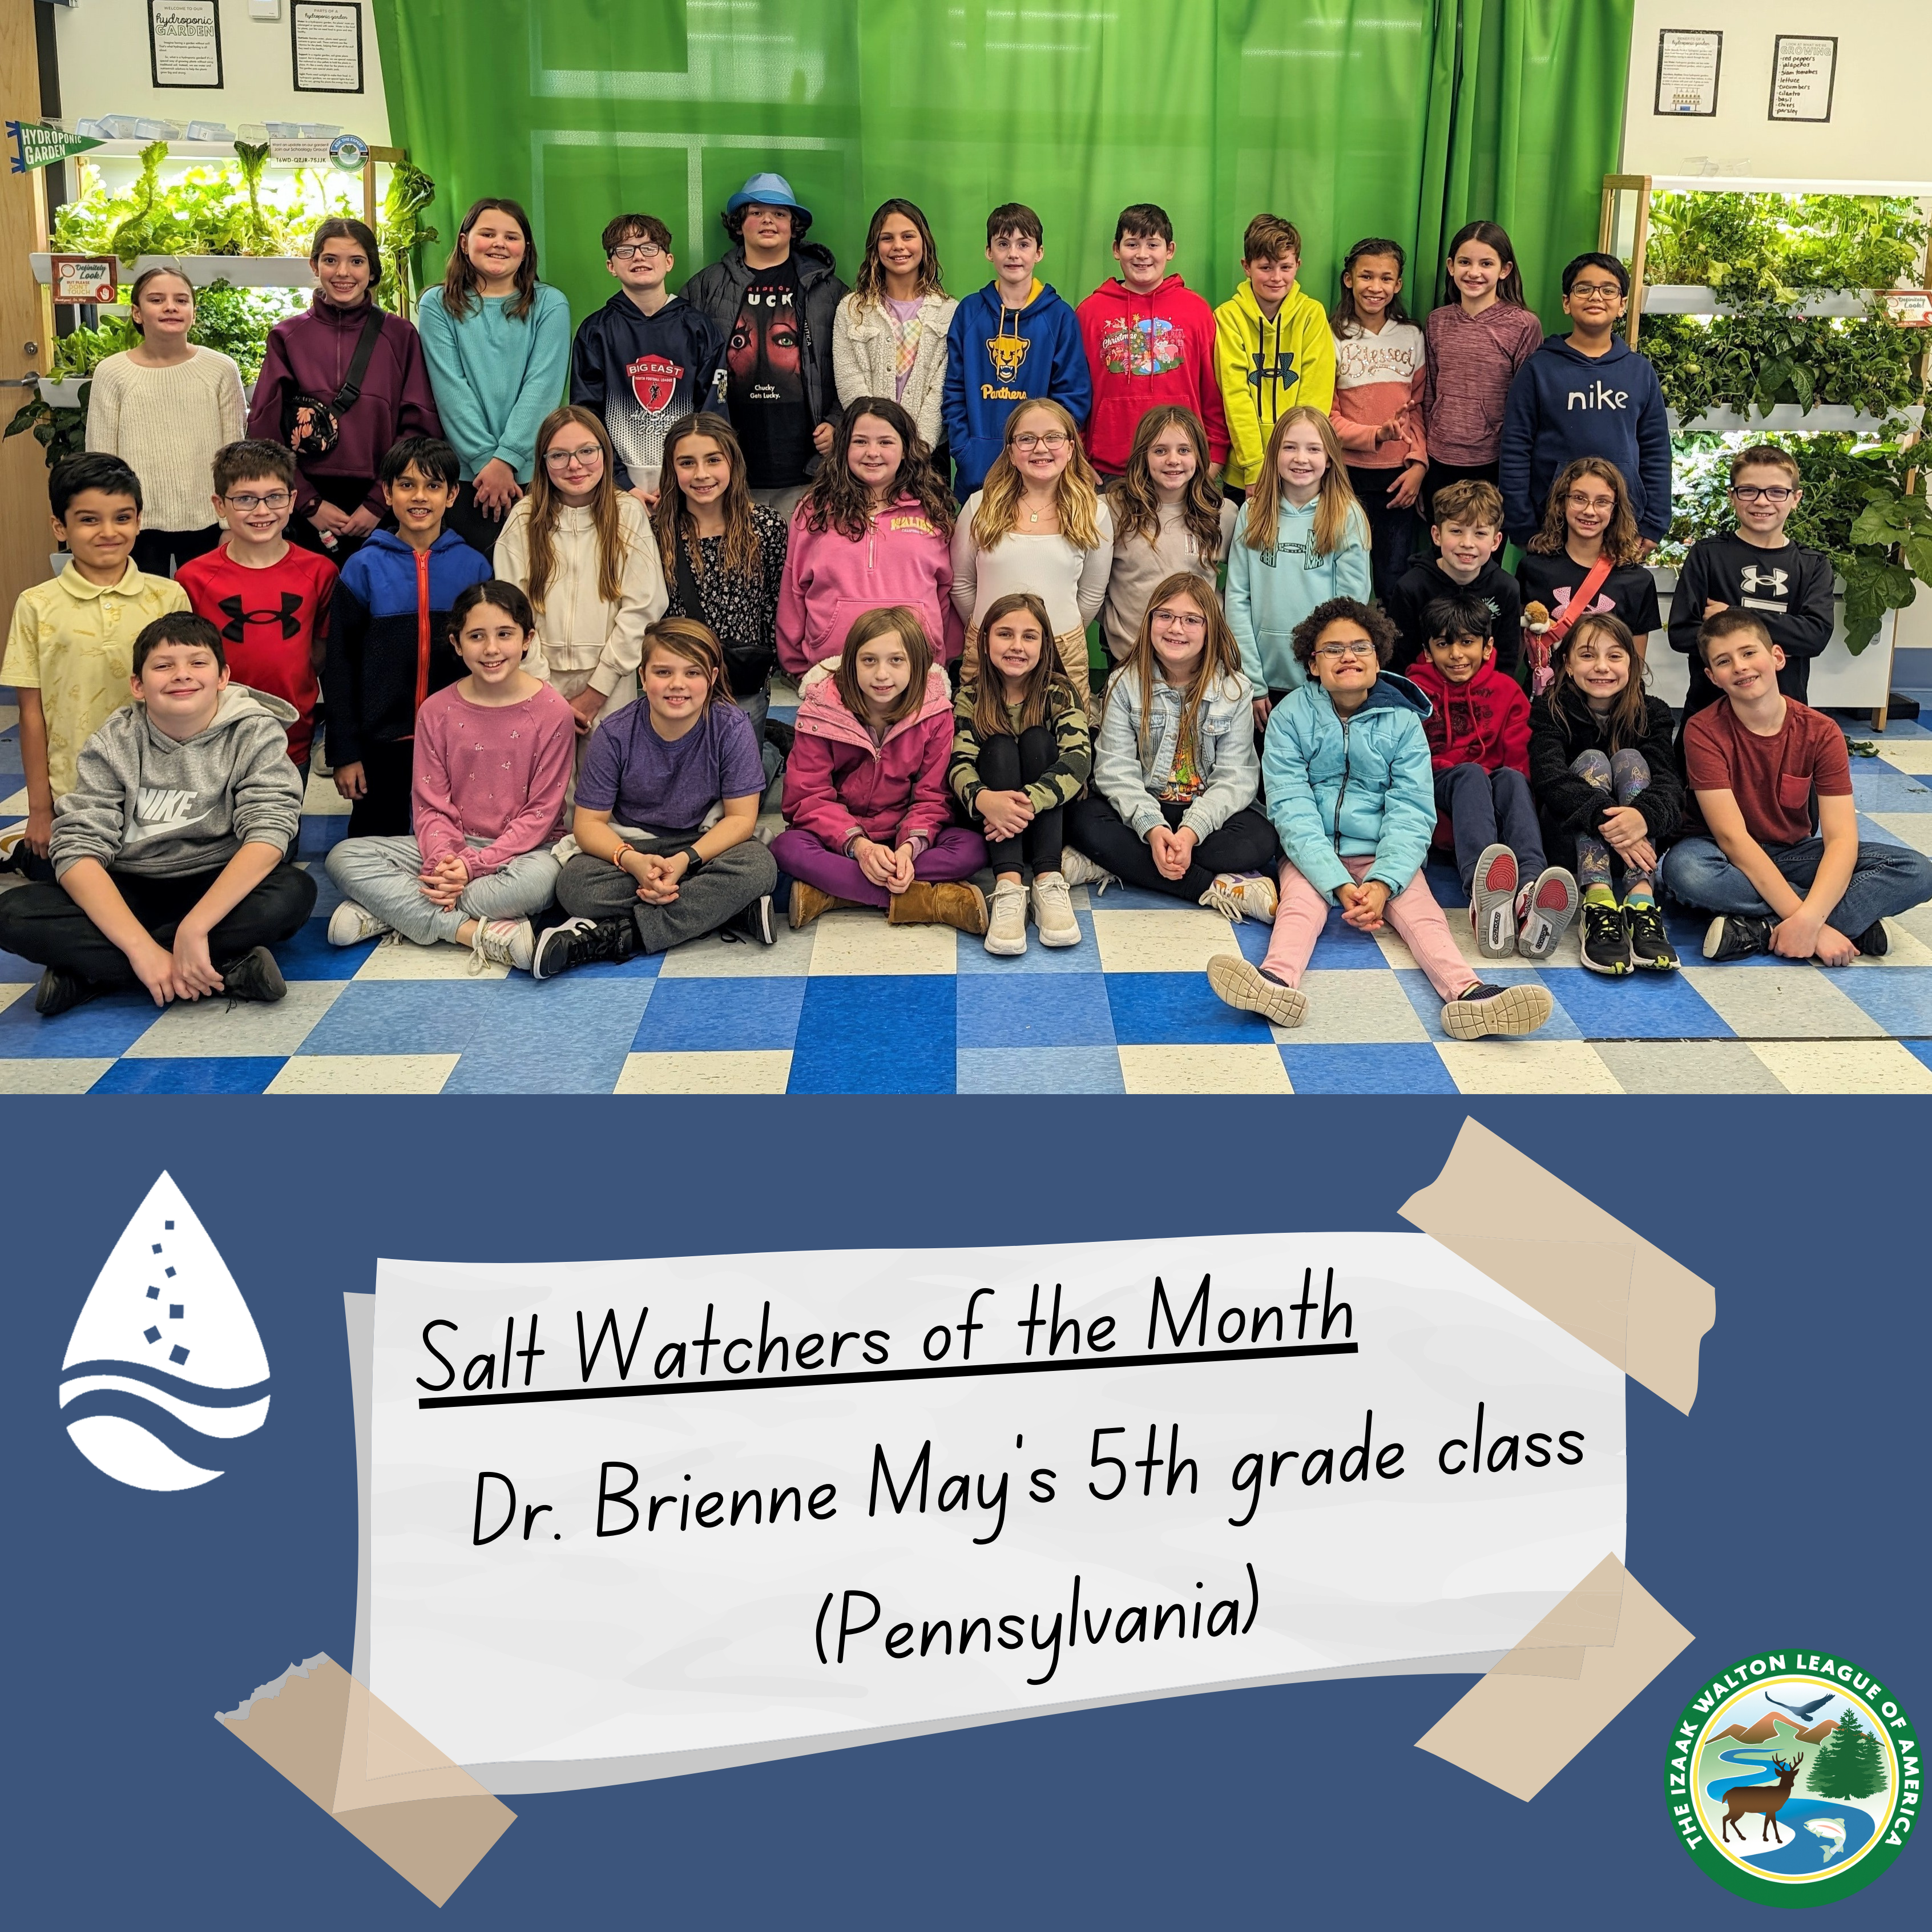 Dr. Brienne May’s 5th grade class